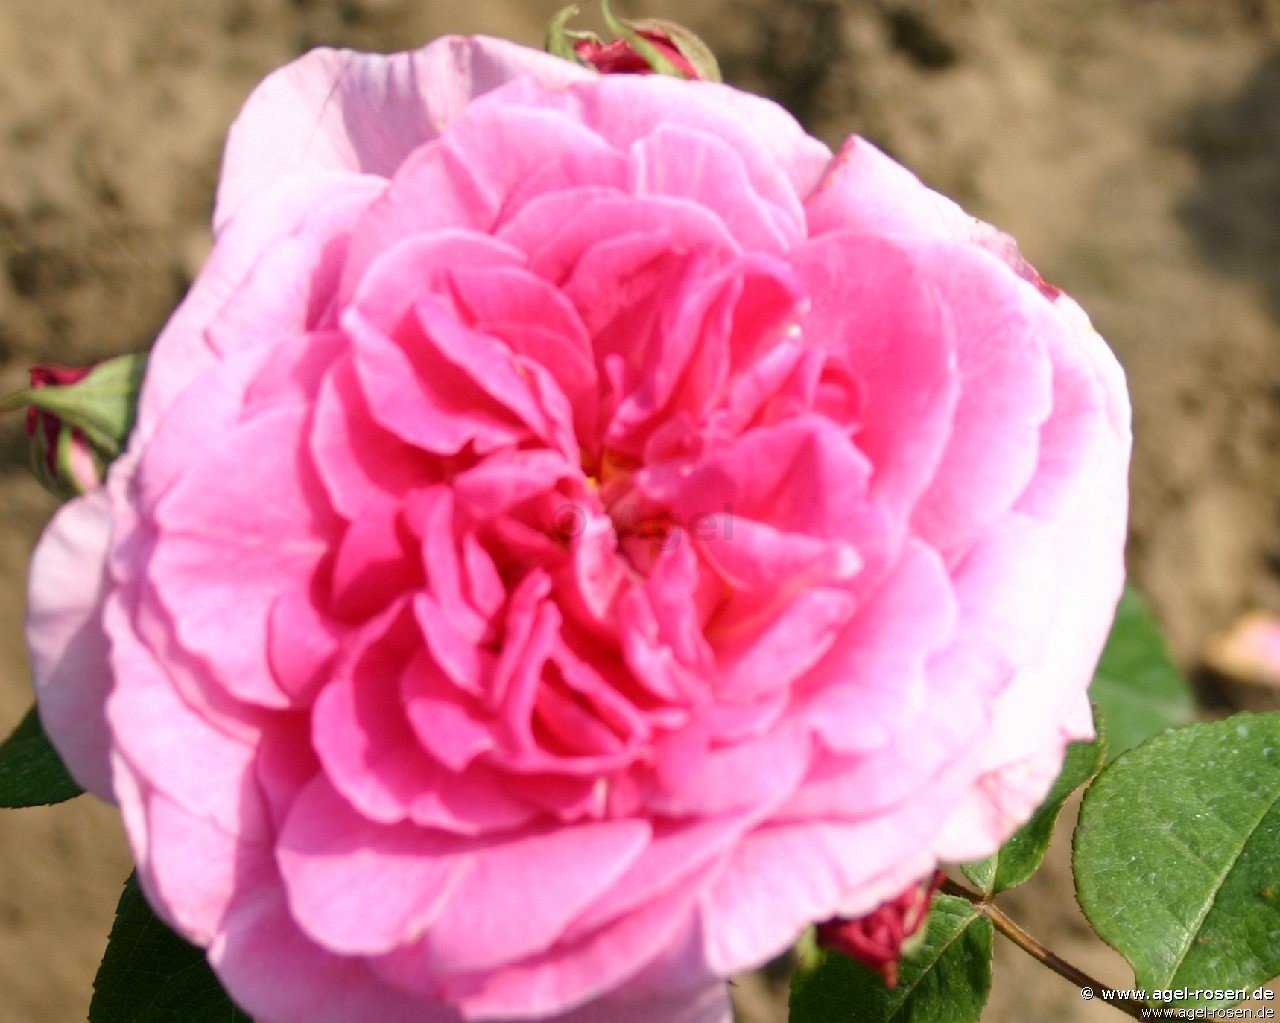 Rose ‘Claire Marshall syn. Jennifer Rose‘ (wurzelnackte Rose)